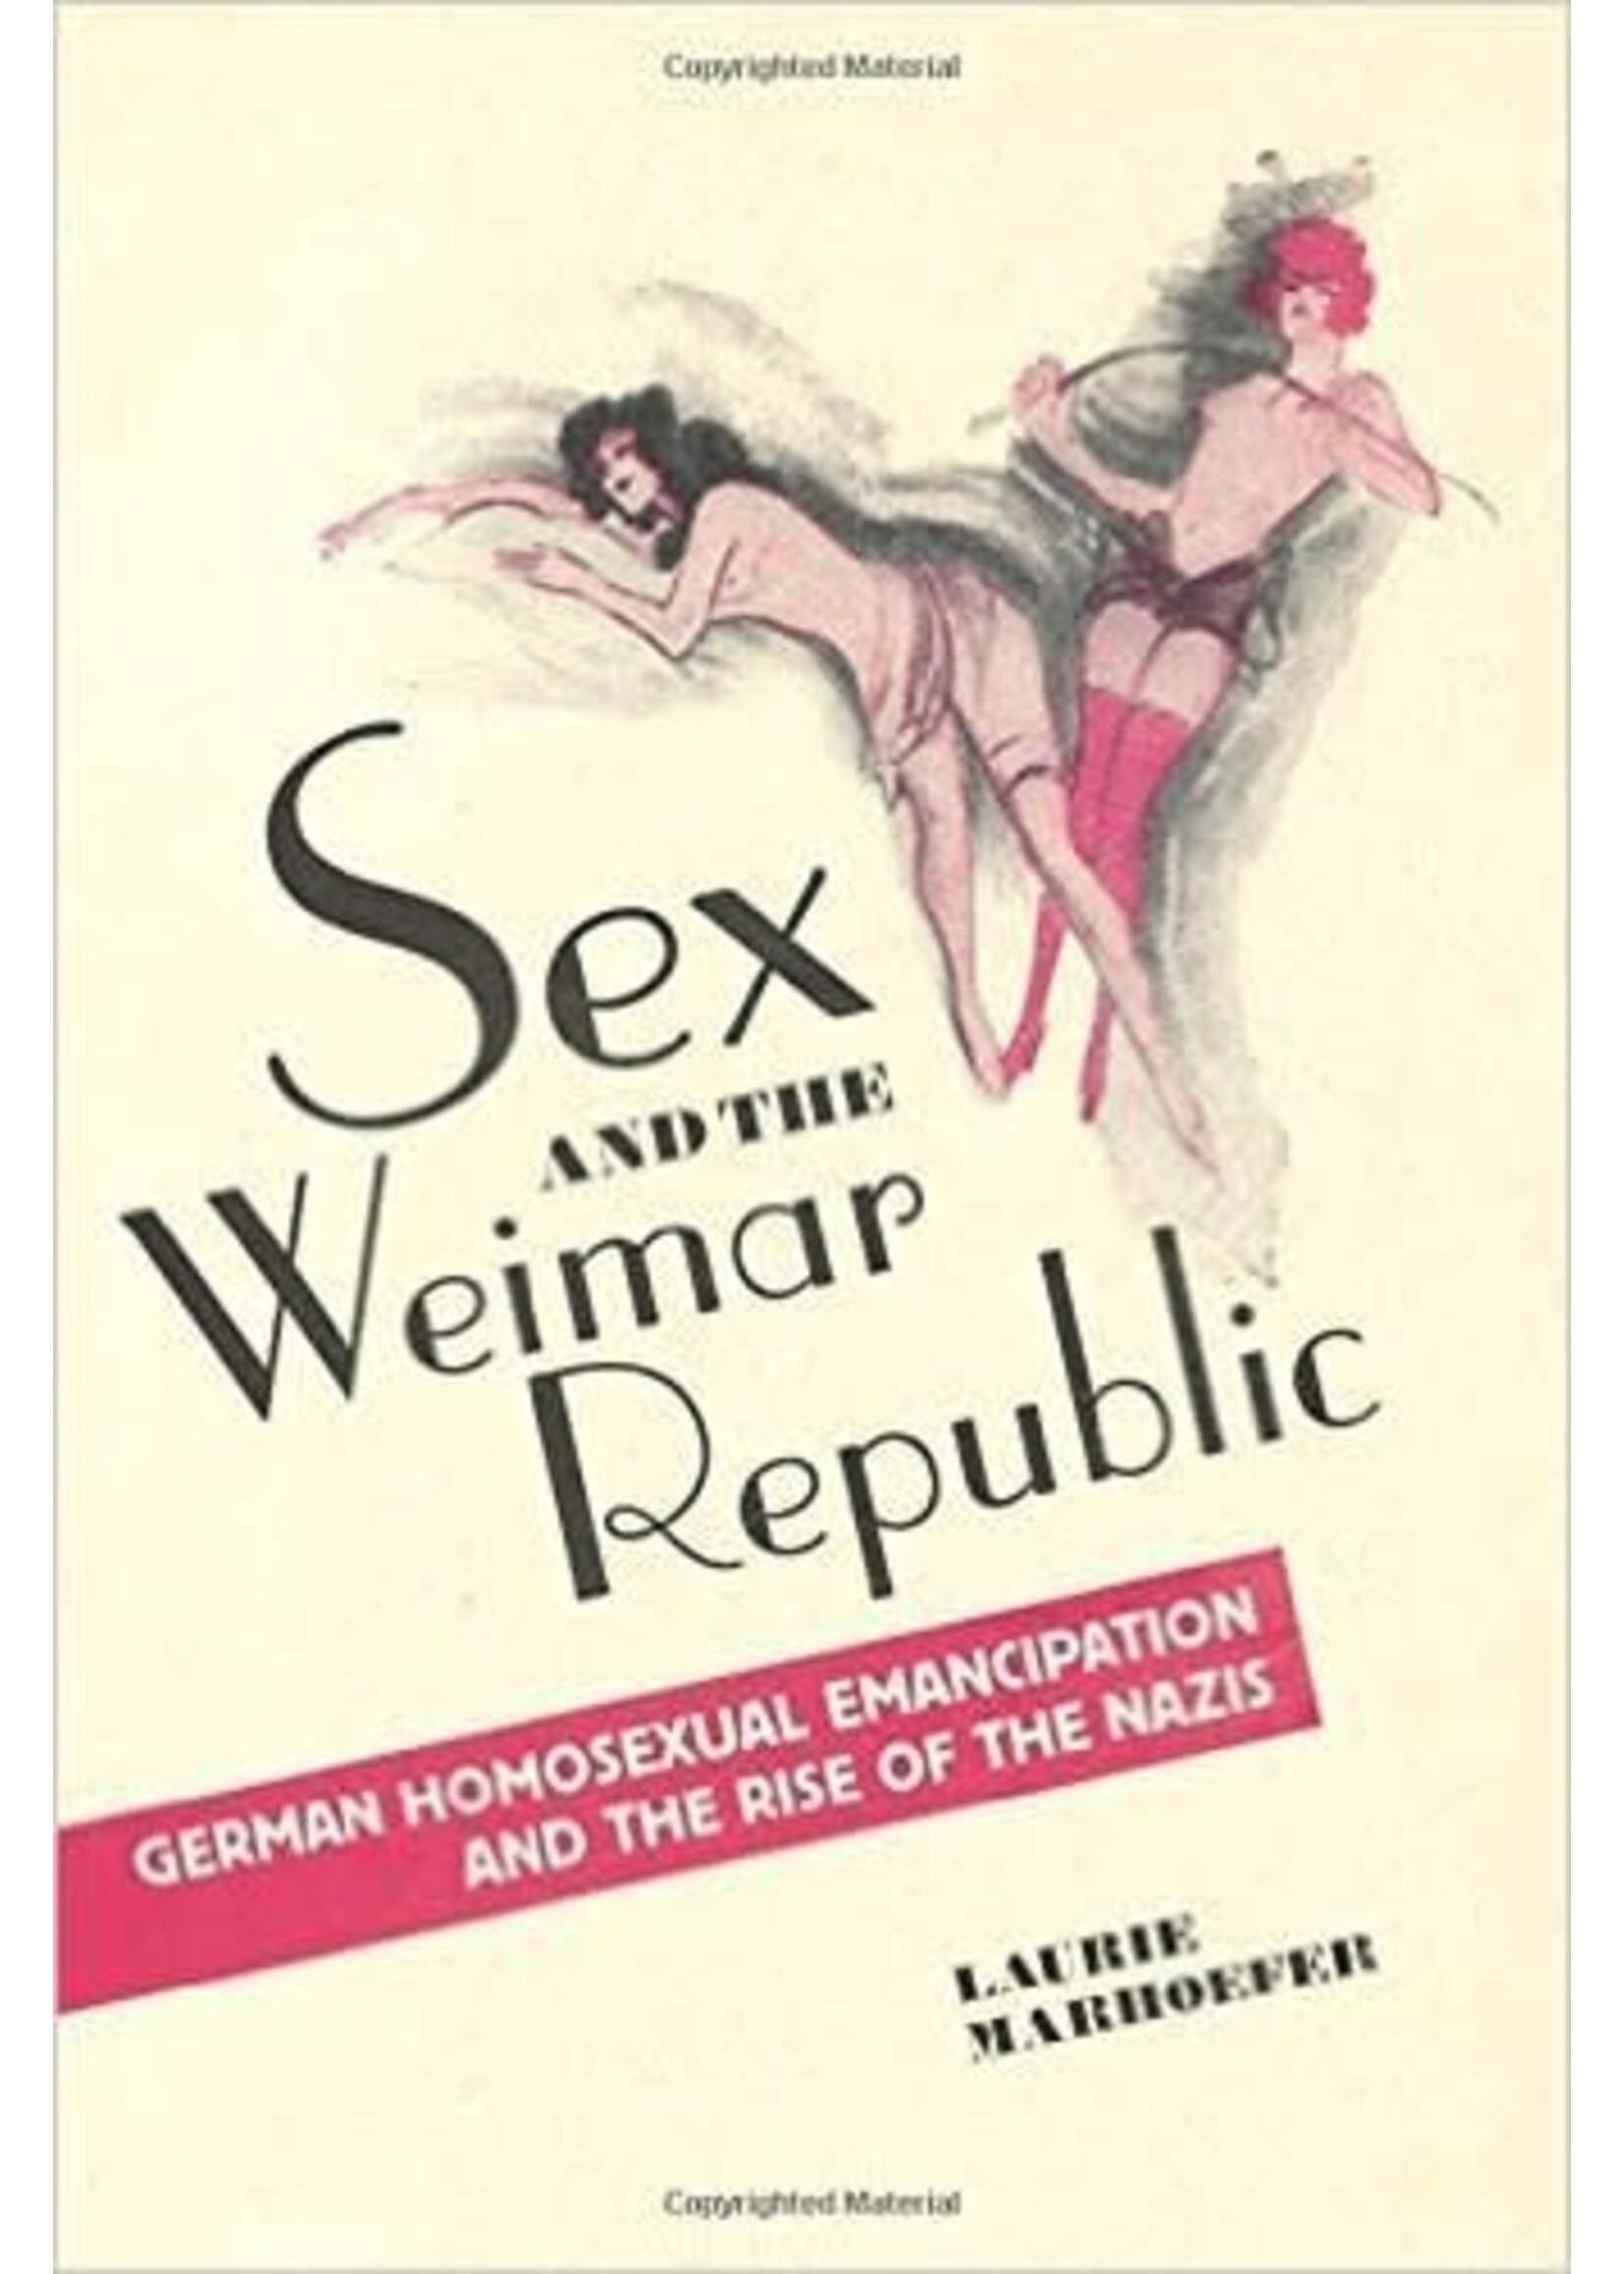 Sex and the Weimar Republic: German Homosexual Emancipation and the Rise of the Nazis by Laurie Marhoefer